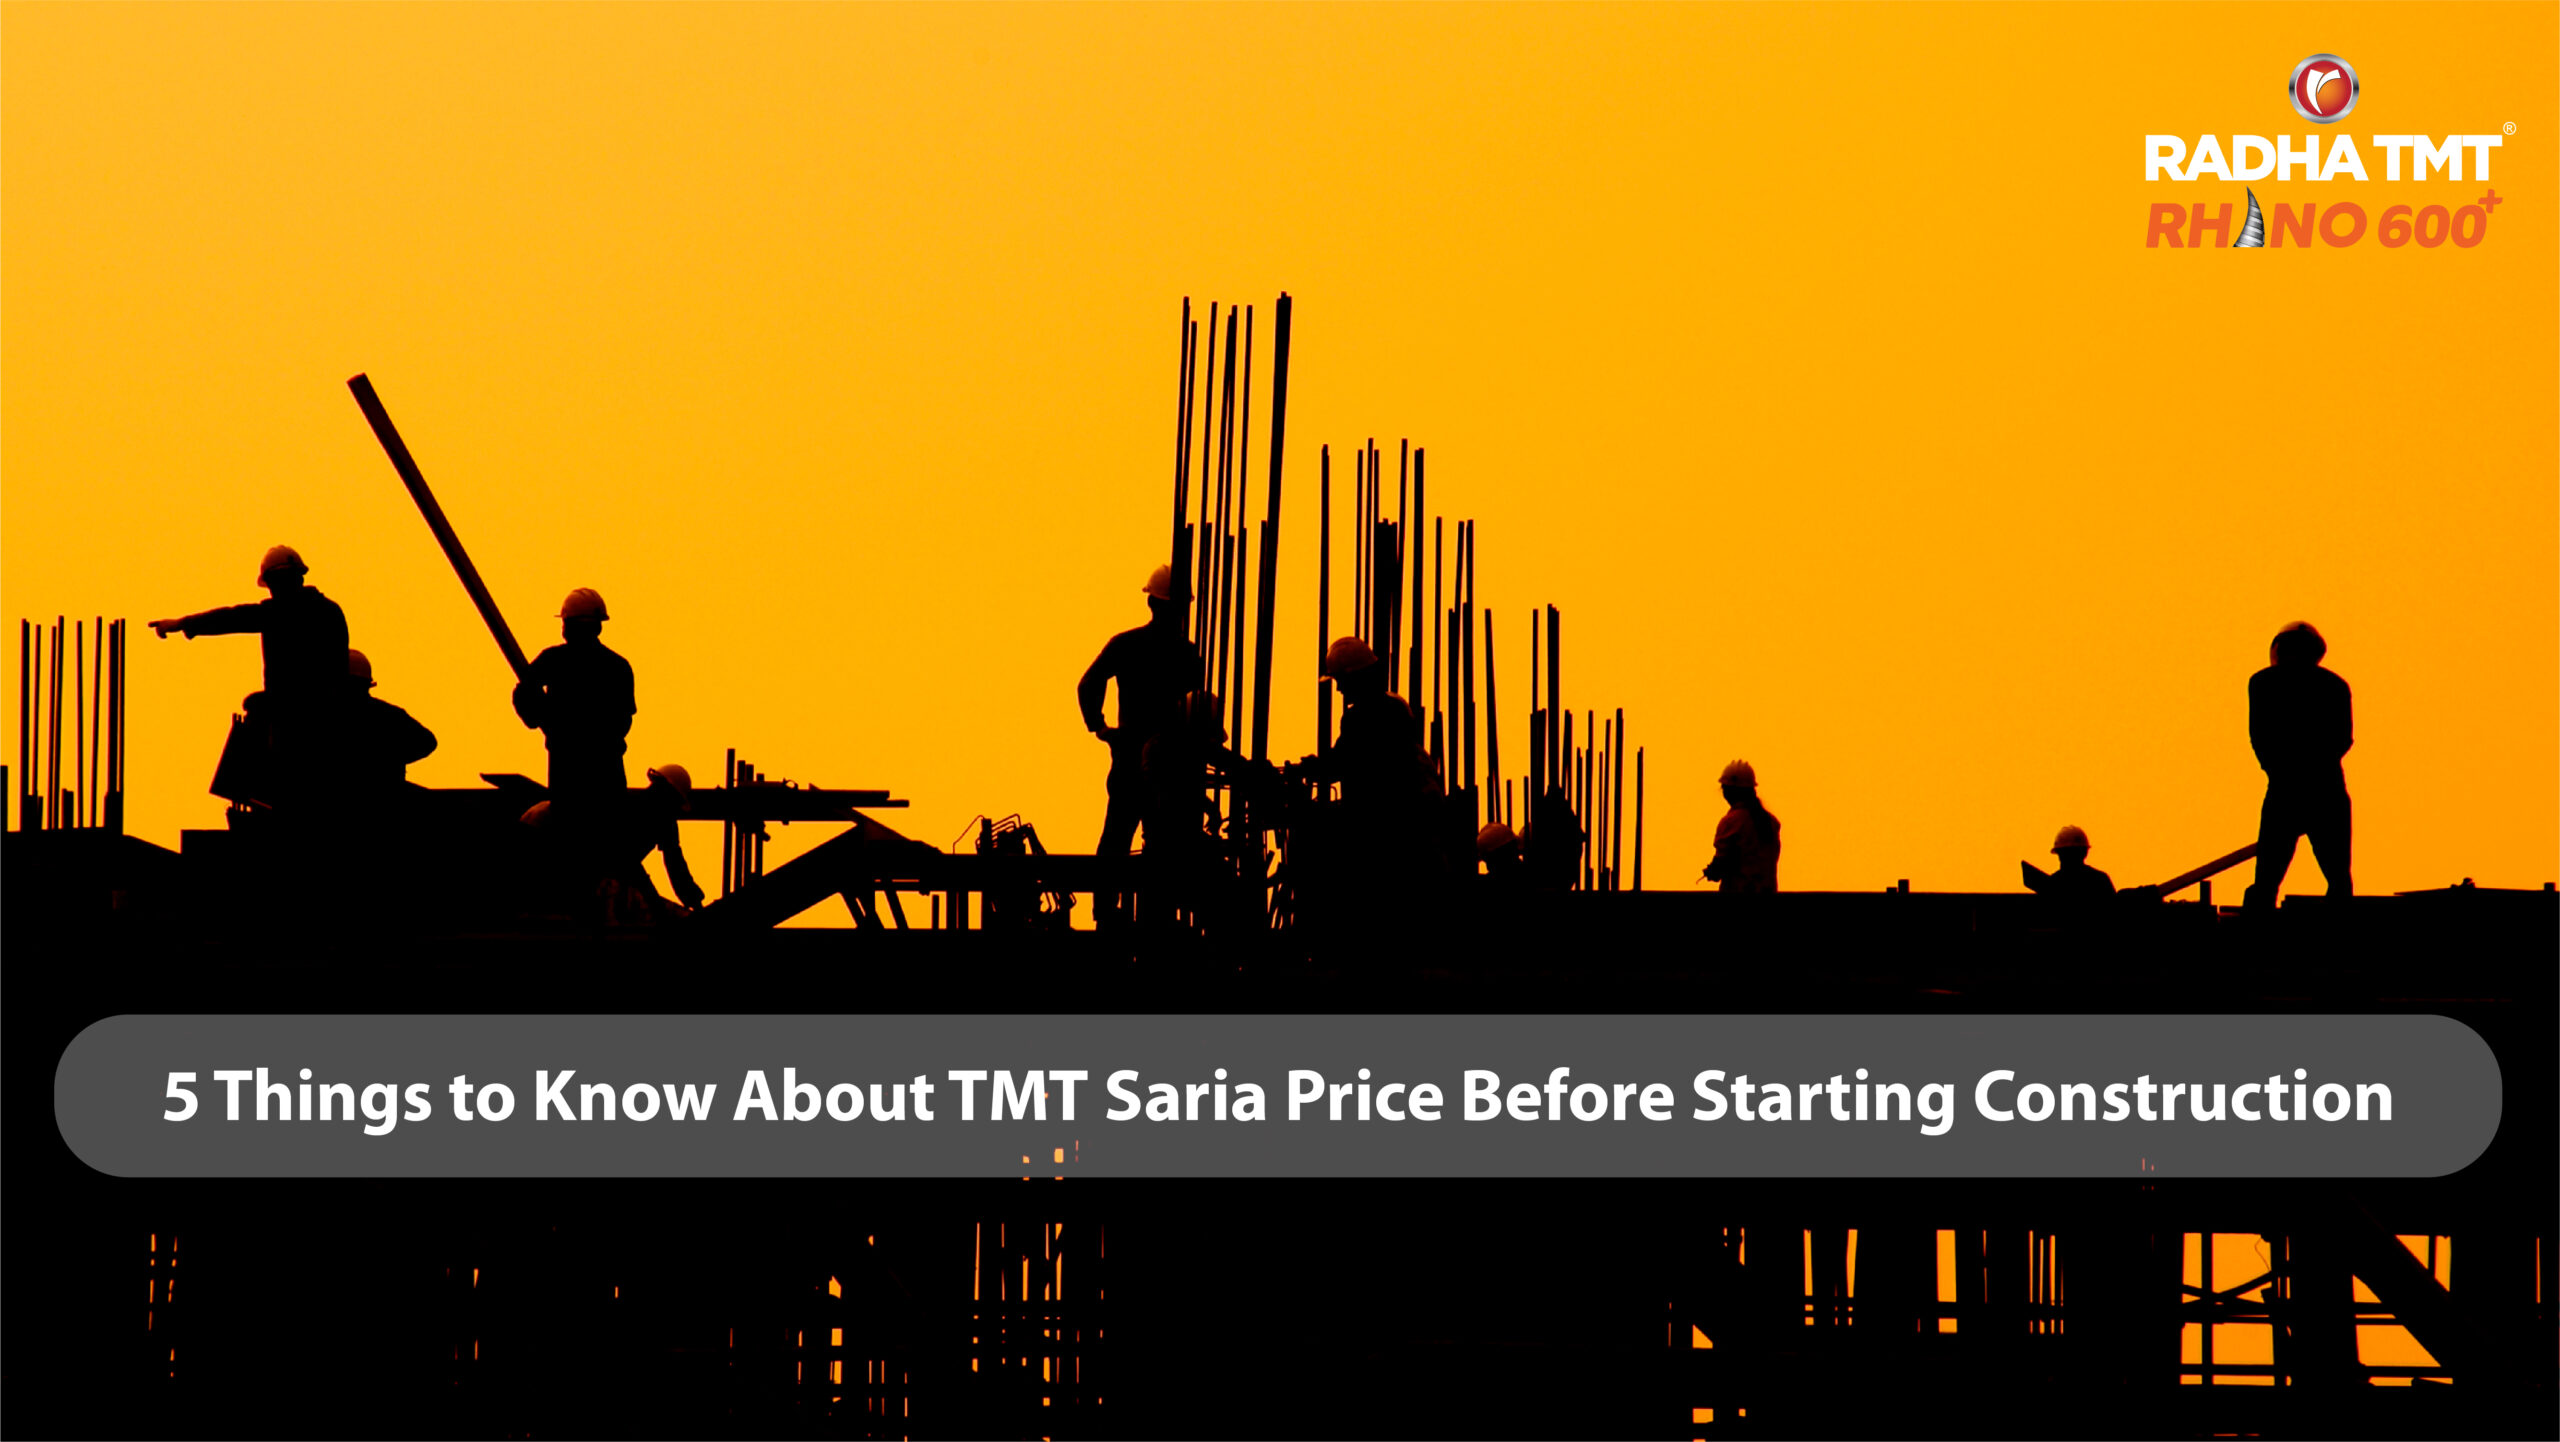 5 Things to Know About TMT Saria Price Before Construction - Radha TMT